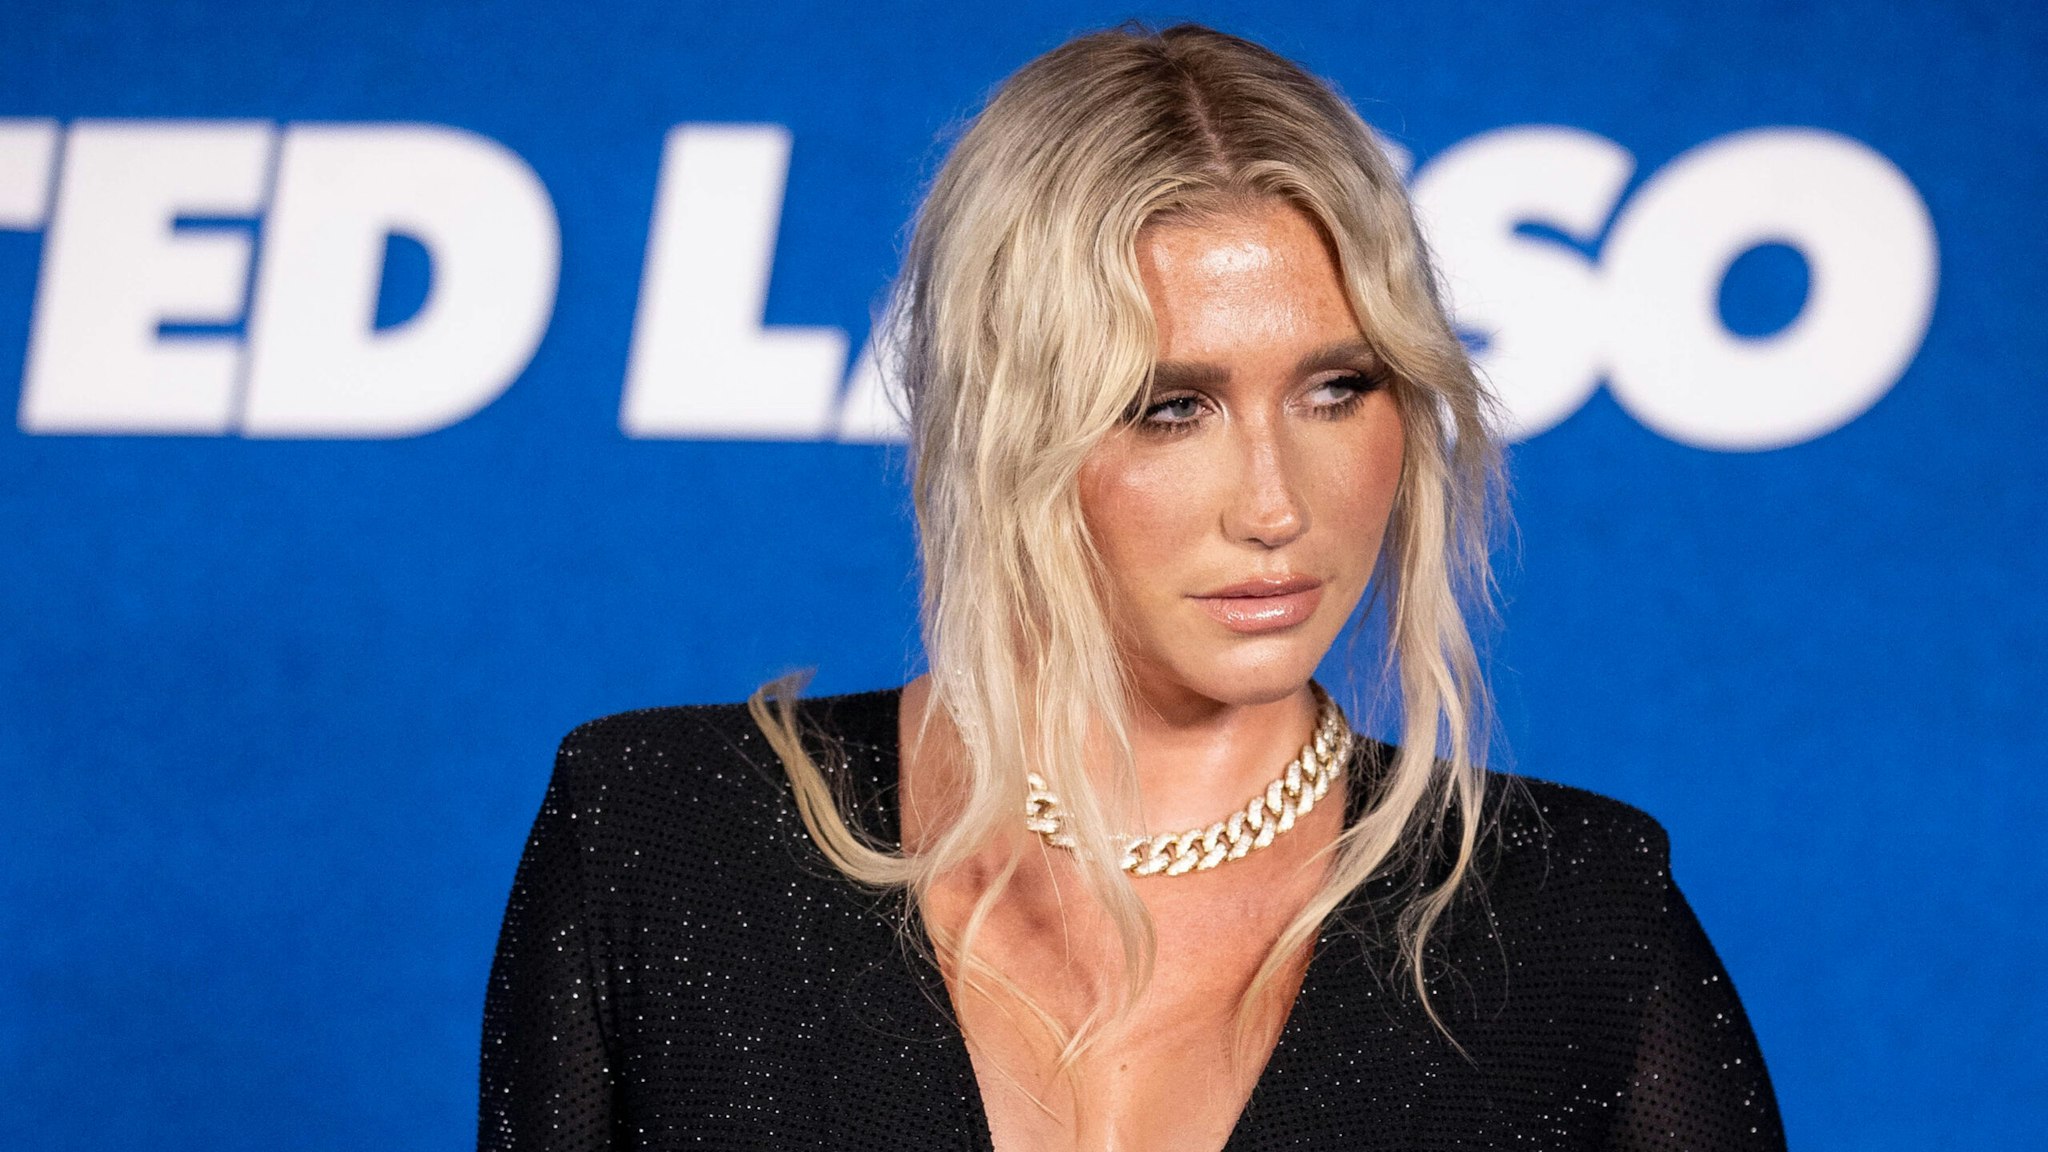 Kesha attends Apple's "Ted Lasso" season two premiere at Pacific Design Center on July 15, 2021 in West Hollywood, California.